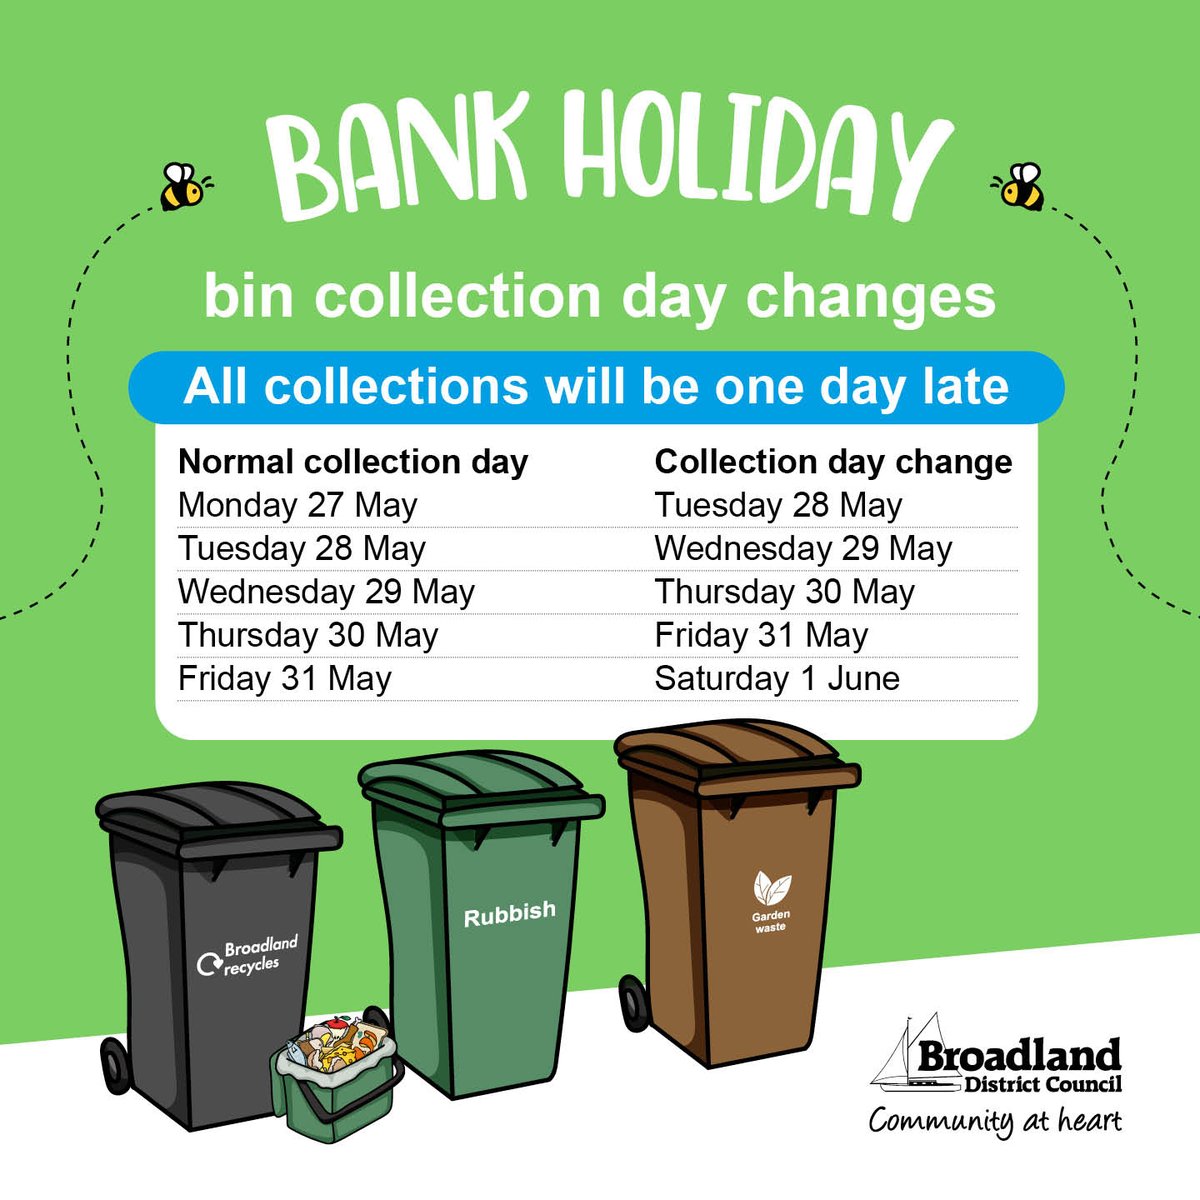 Rubbish, recycling, food waste and garden waste collections will be one day late this week due to the bank holiday. Please check the schedule for your collection day changes 👇 Keep up to date with your collections by downloading the Bin Collections app: ow.ly/6zyR50Rshmk